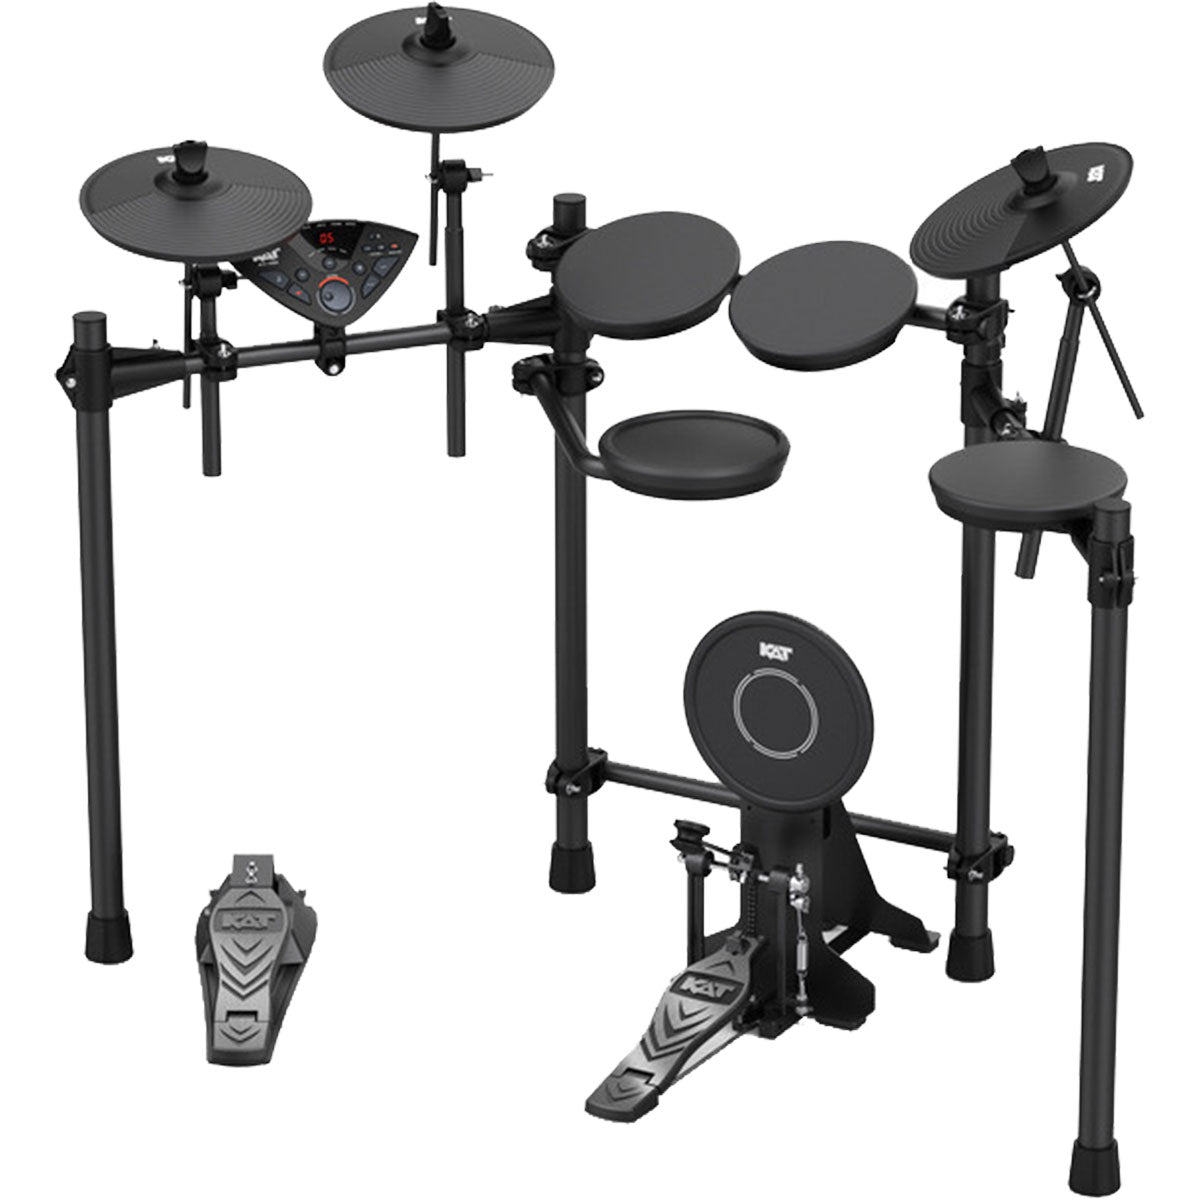 3/4 view of Kat Percussion KT-100 Electronic Drum Set showing top, back and left side